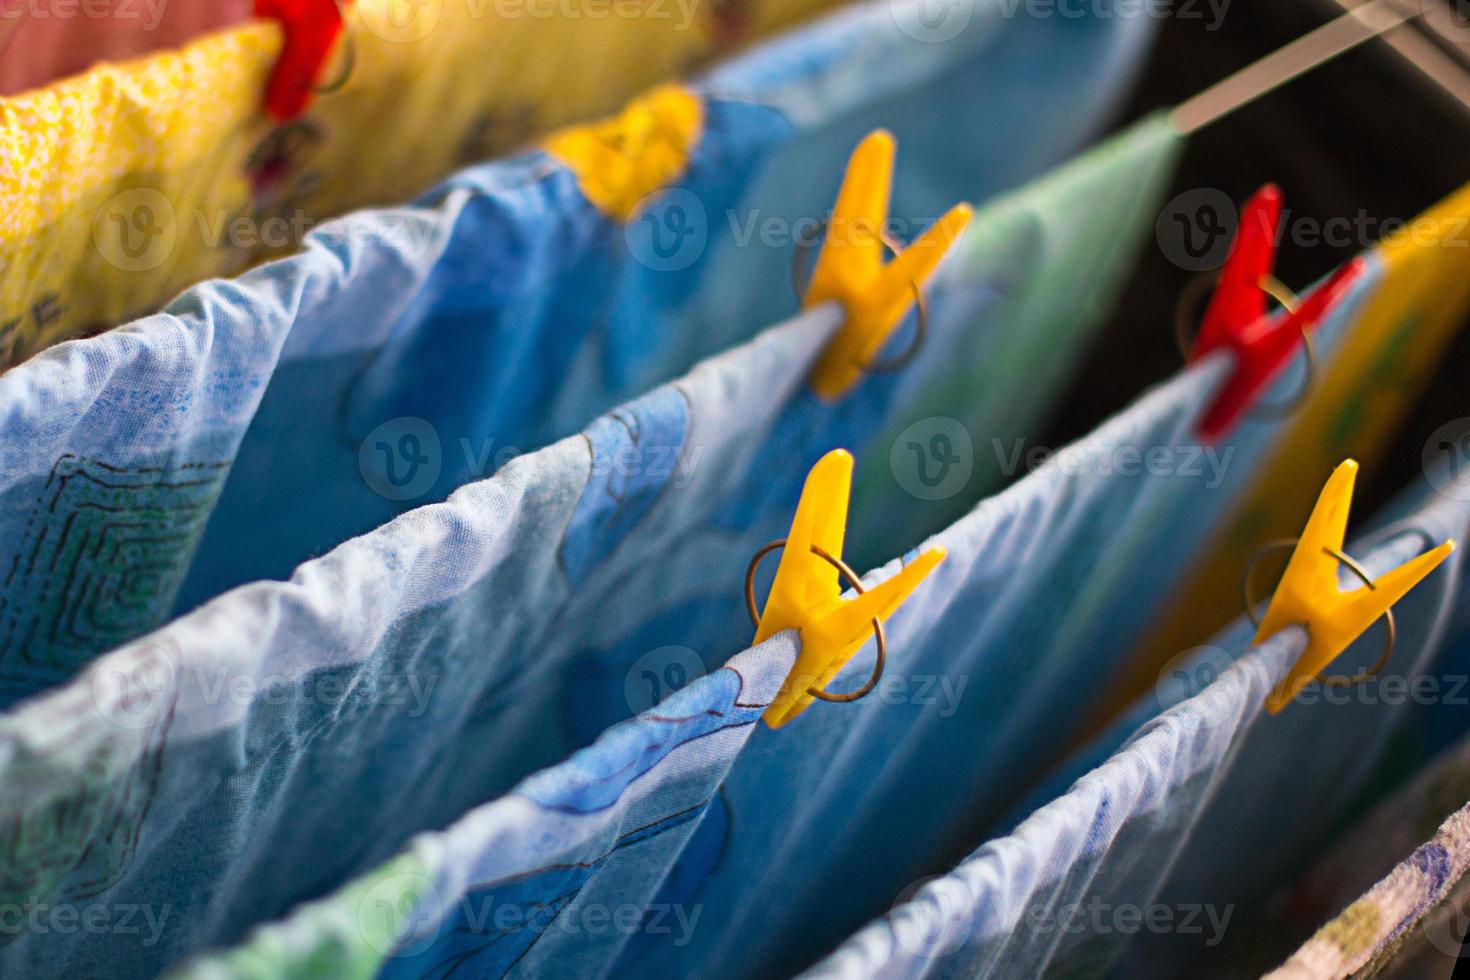 Colorful clean bed linen and towels after washing are hung on the bars of the dryer and secured with yellow and red clothespins. General cleaning, Laundry drying, compact dryer for the house. photo